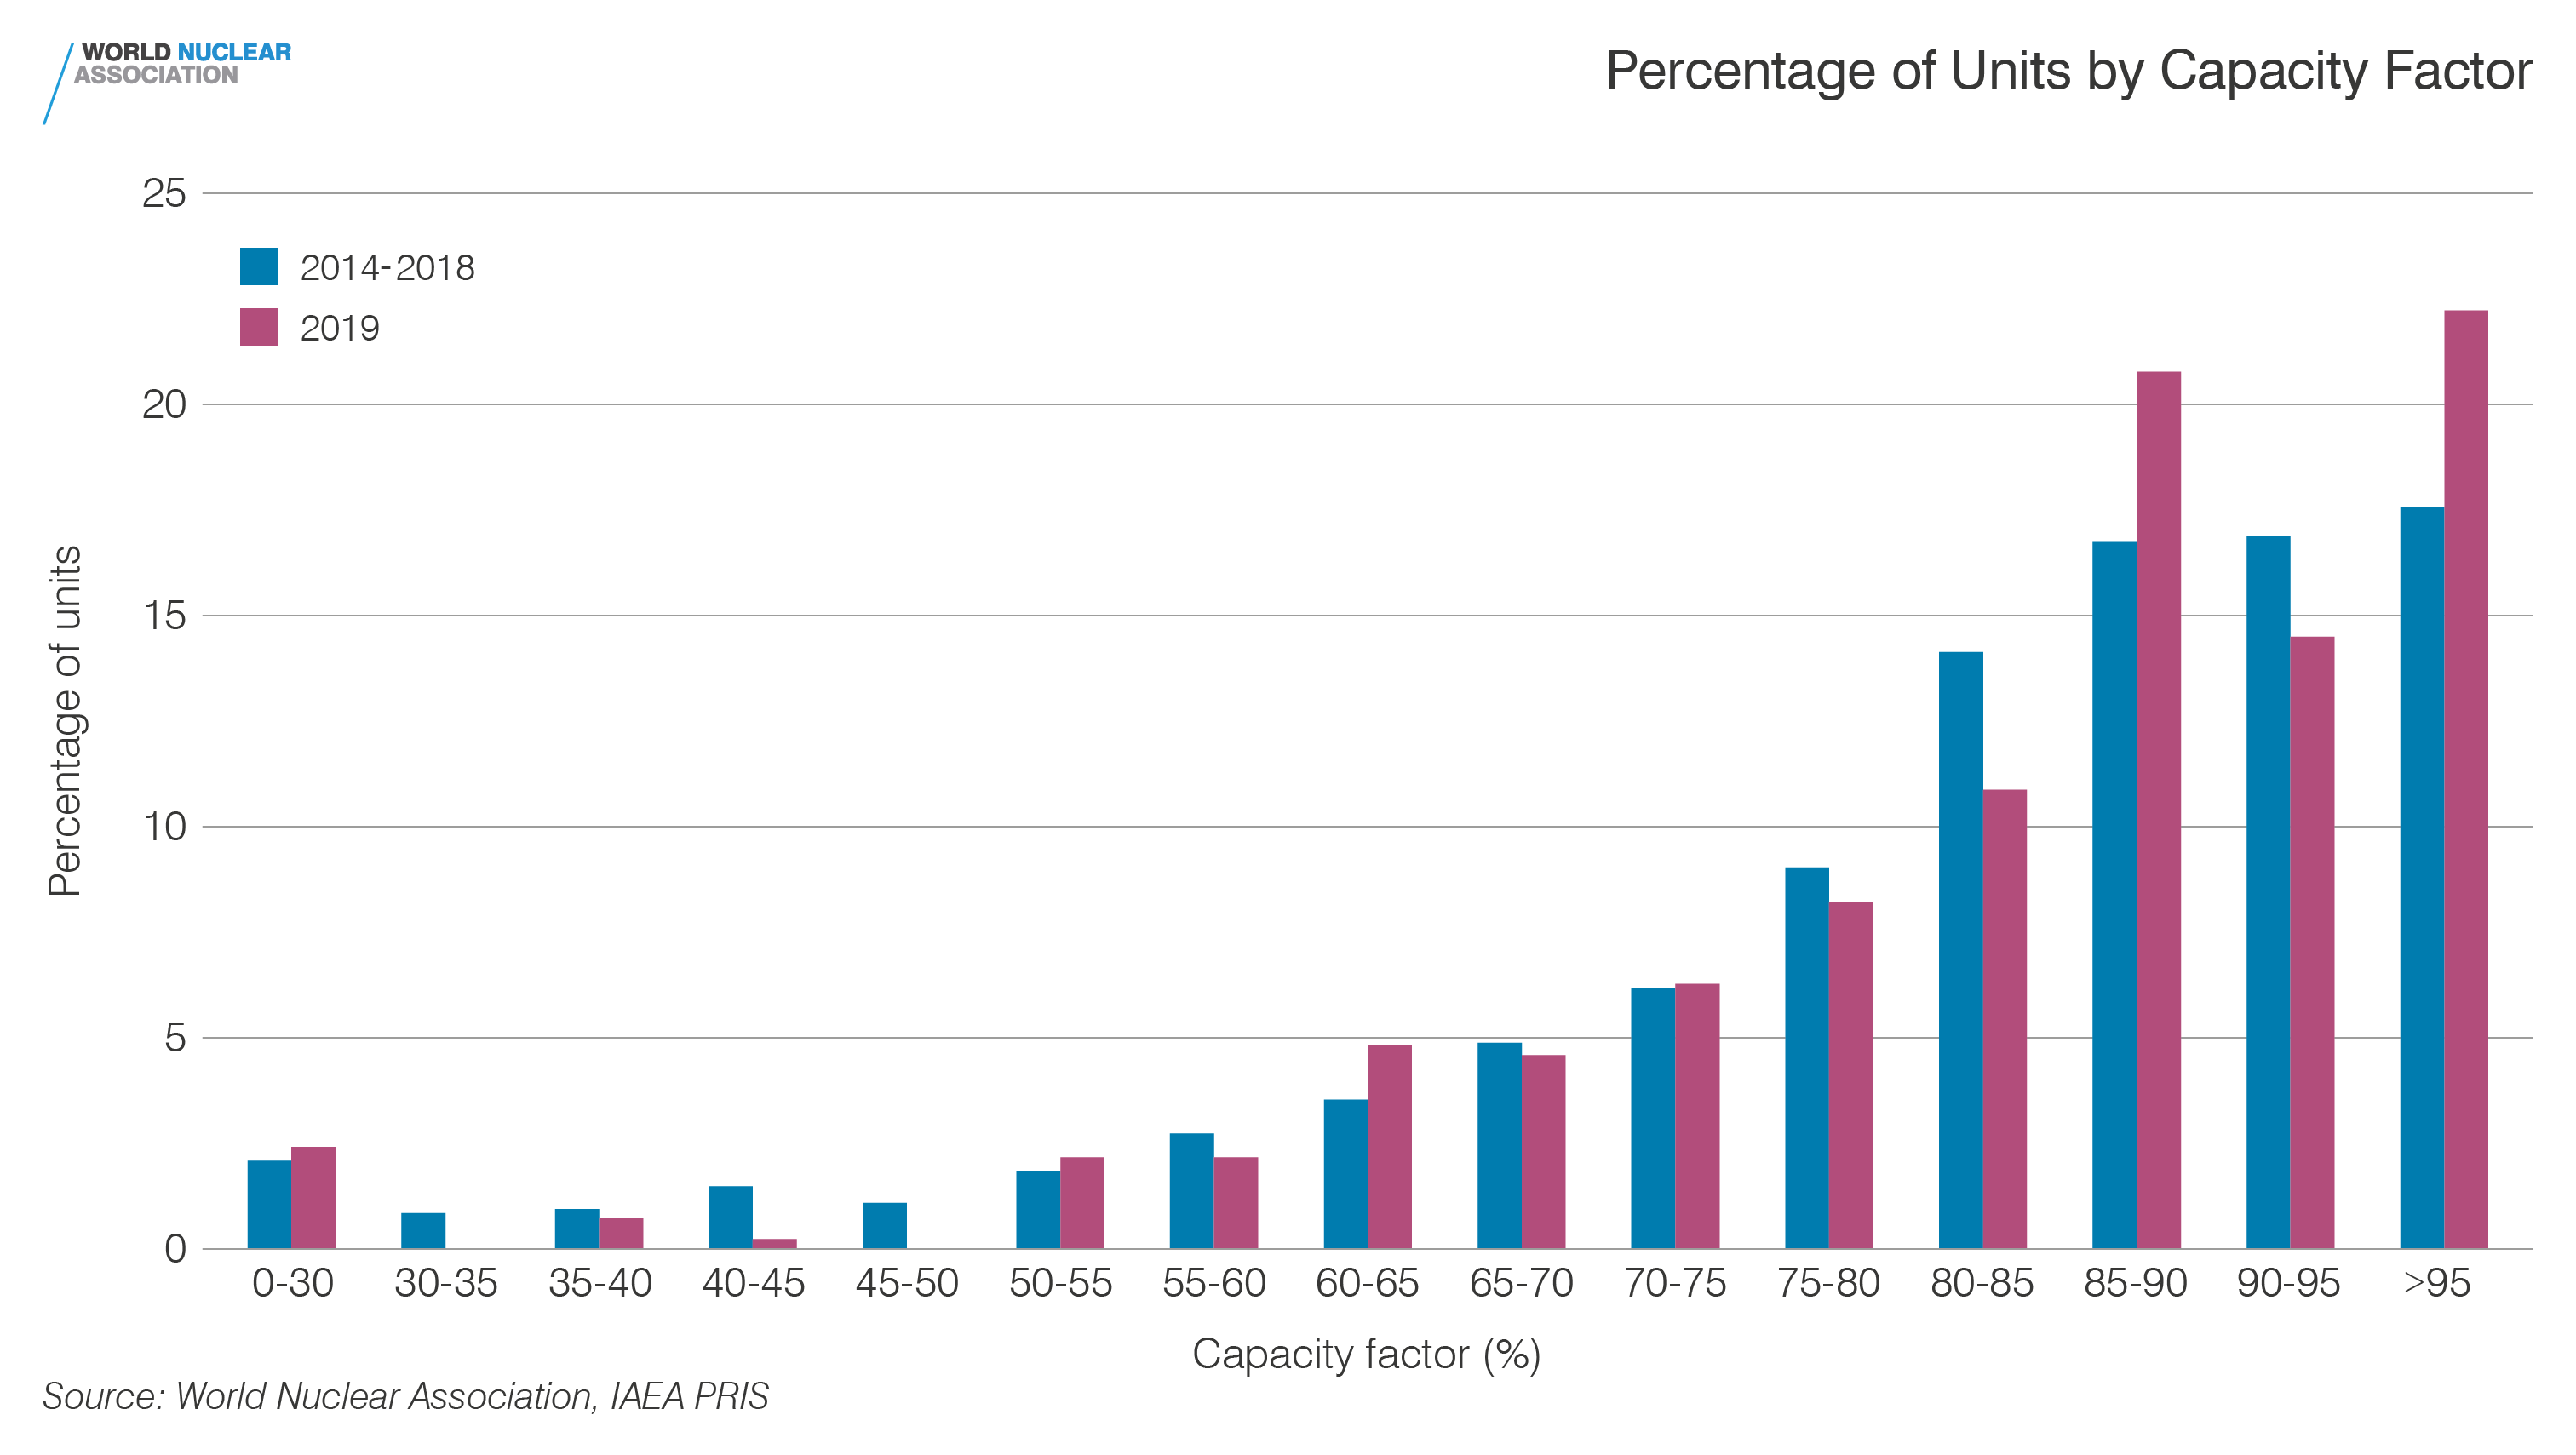 Percentage of units by capacity factor